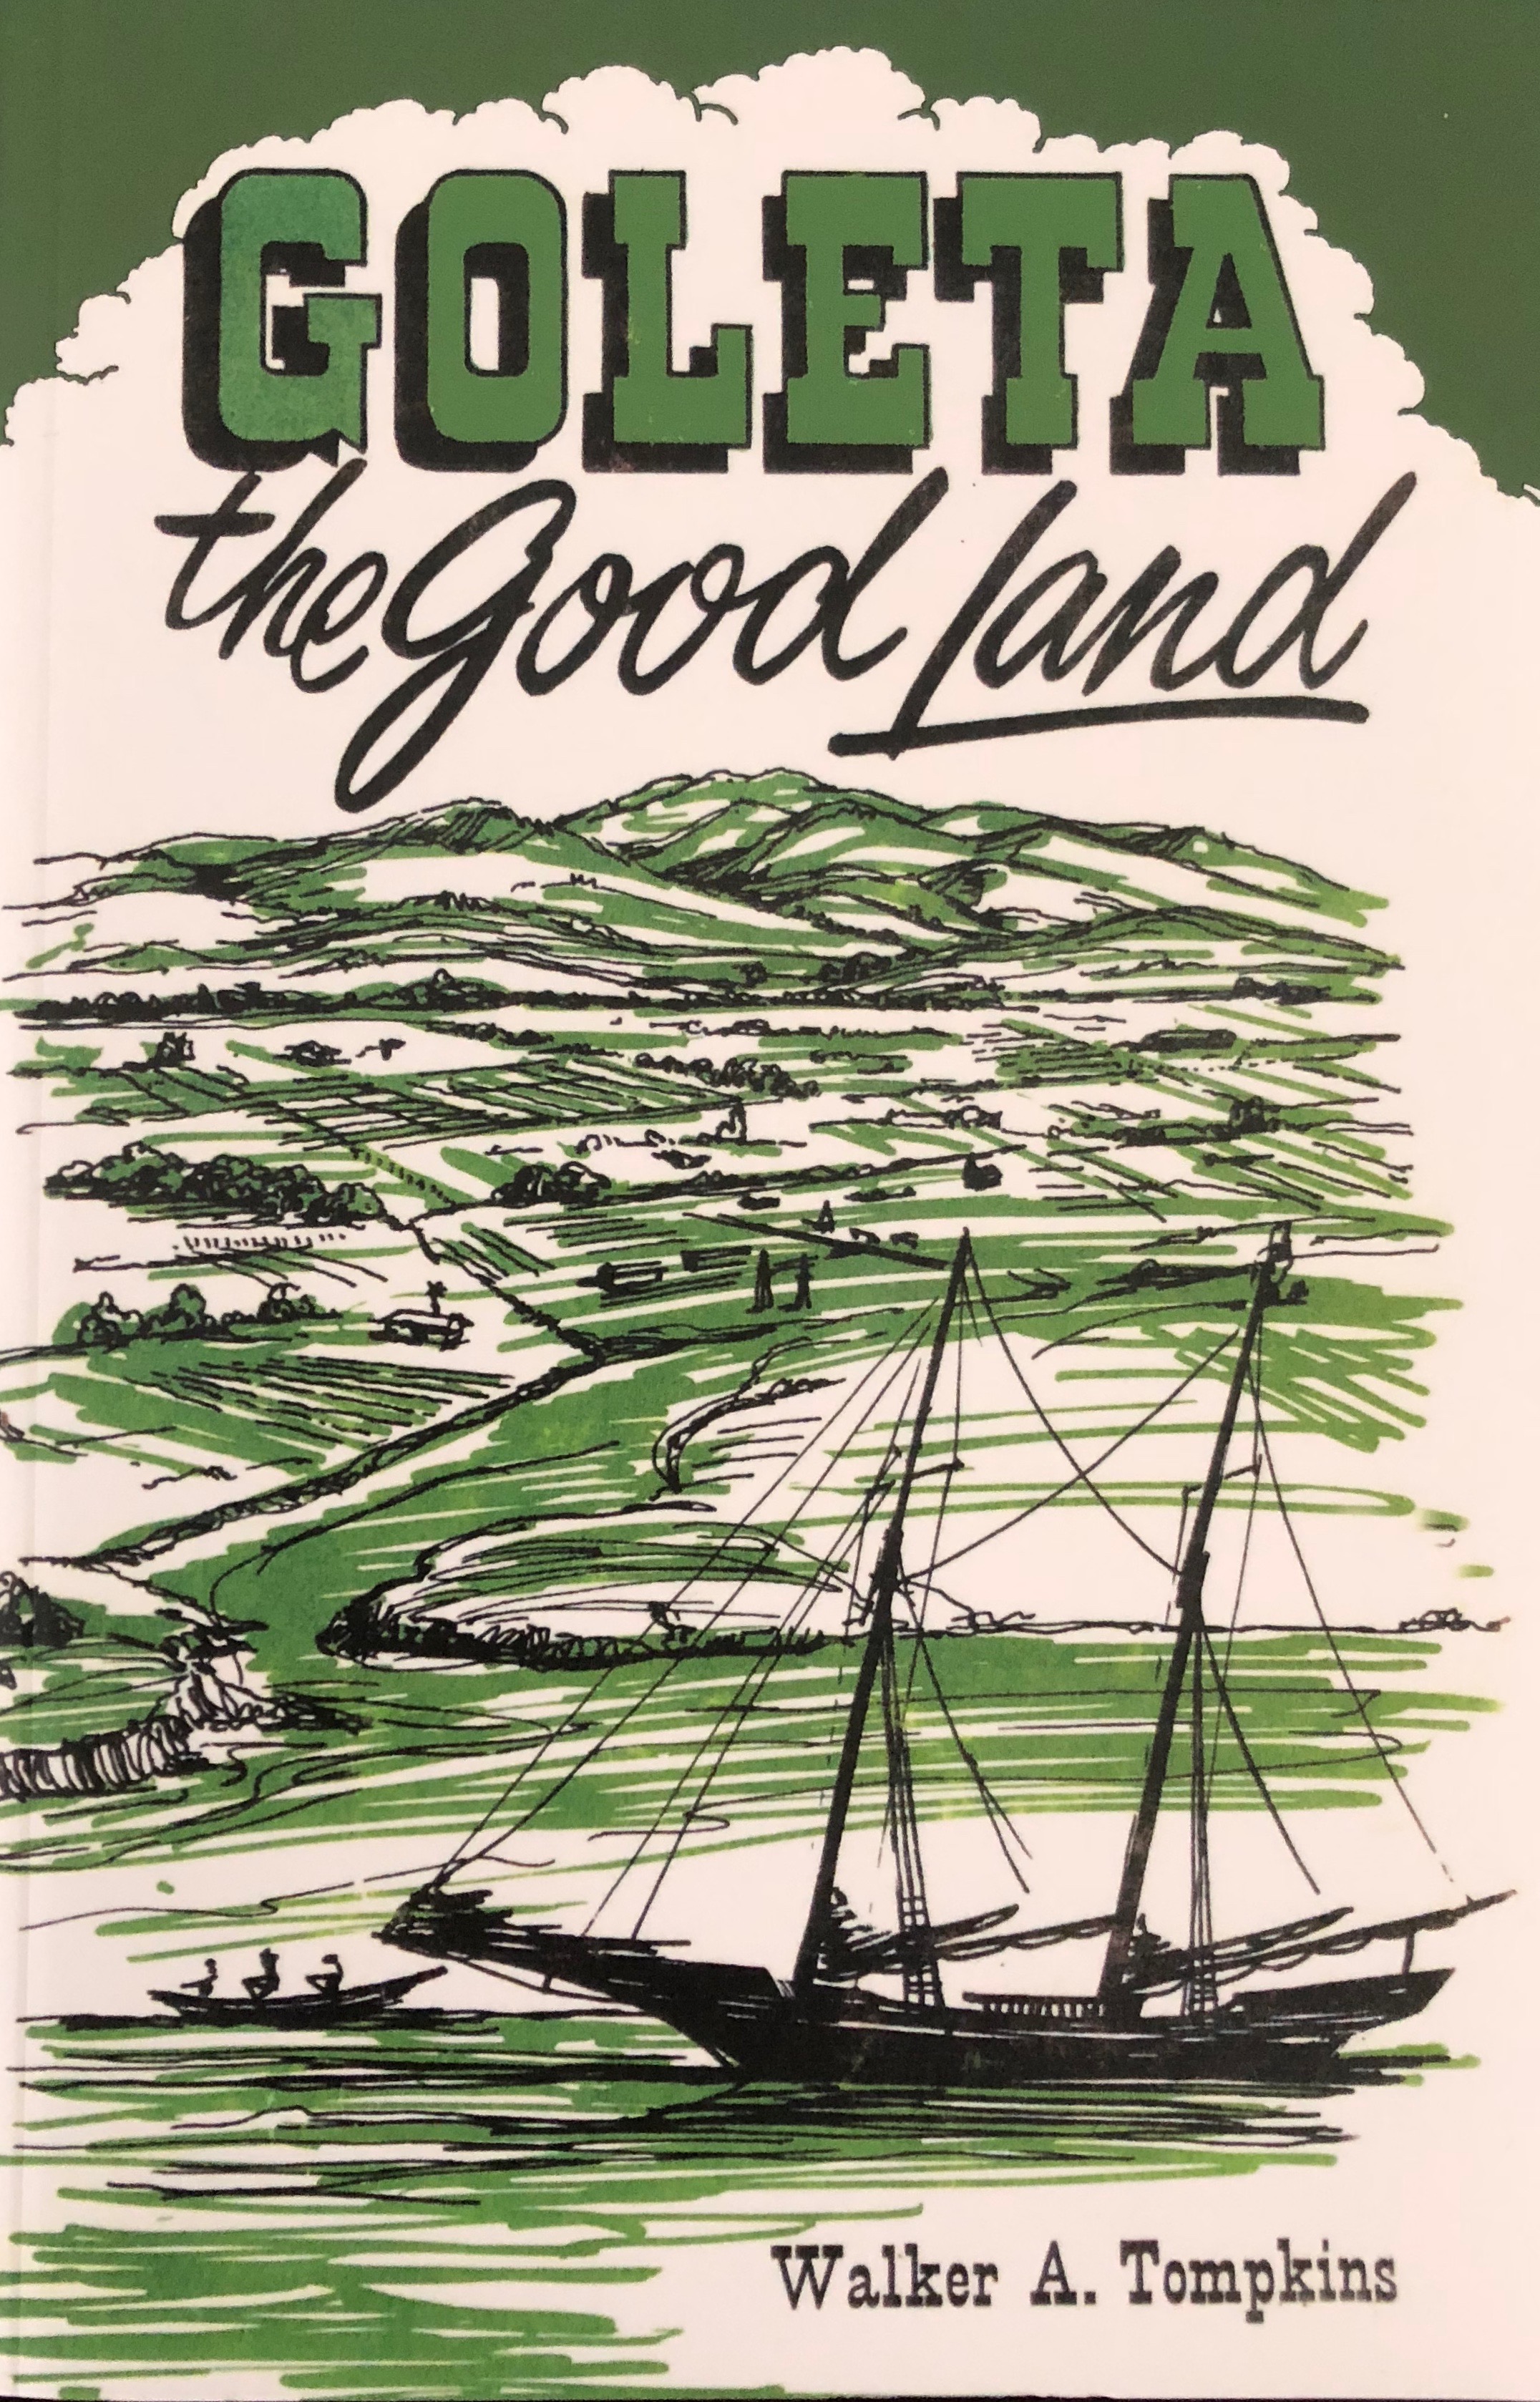 Goleta The Good Land, by Walker A Tompkins (Soft Cover)